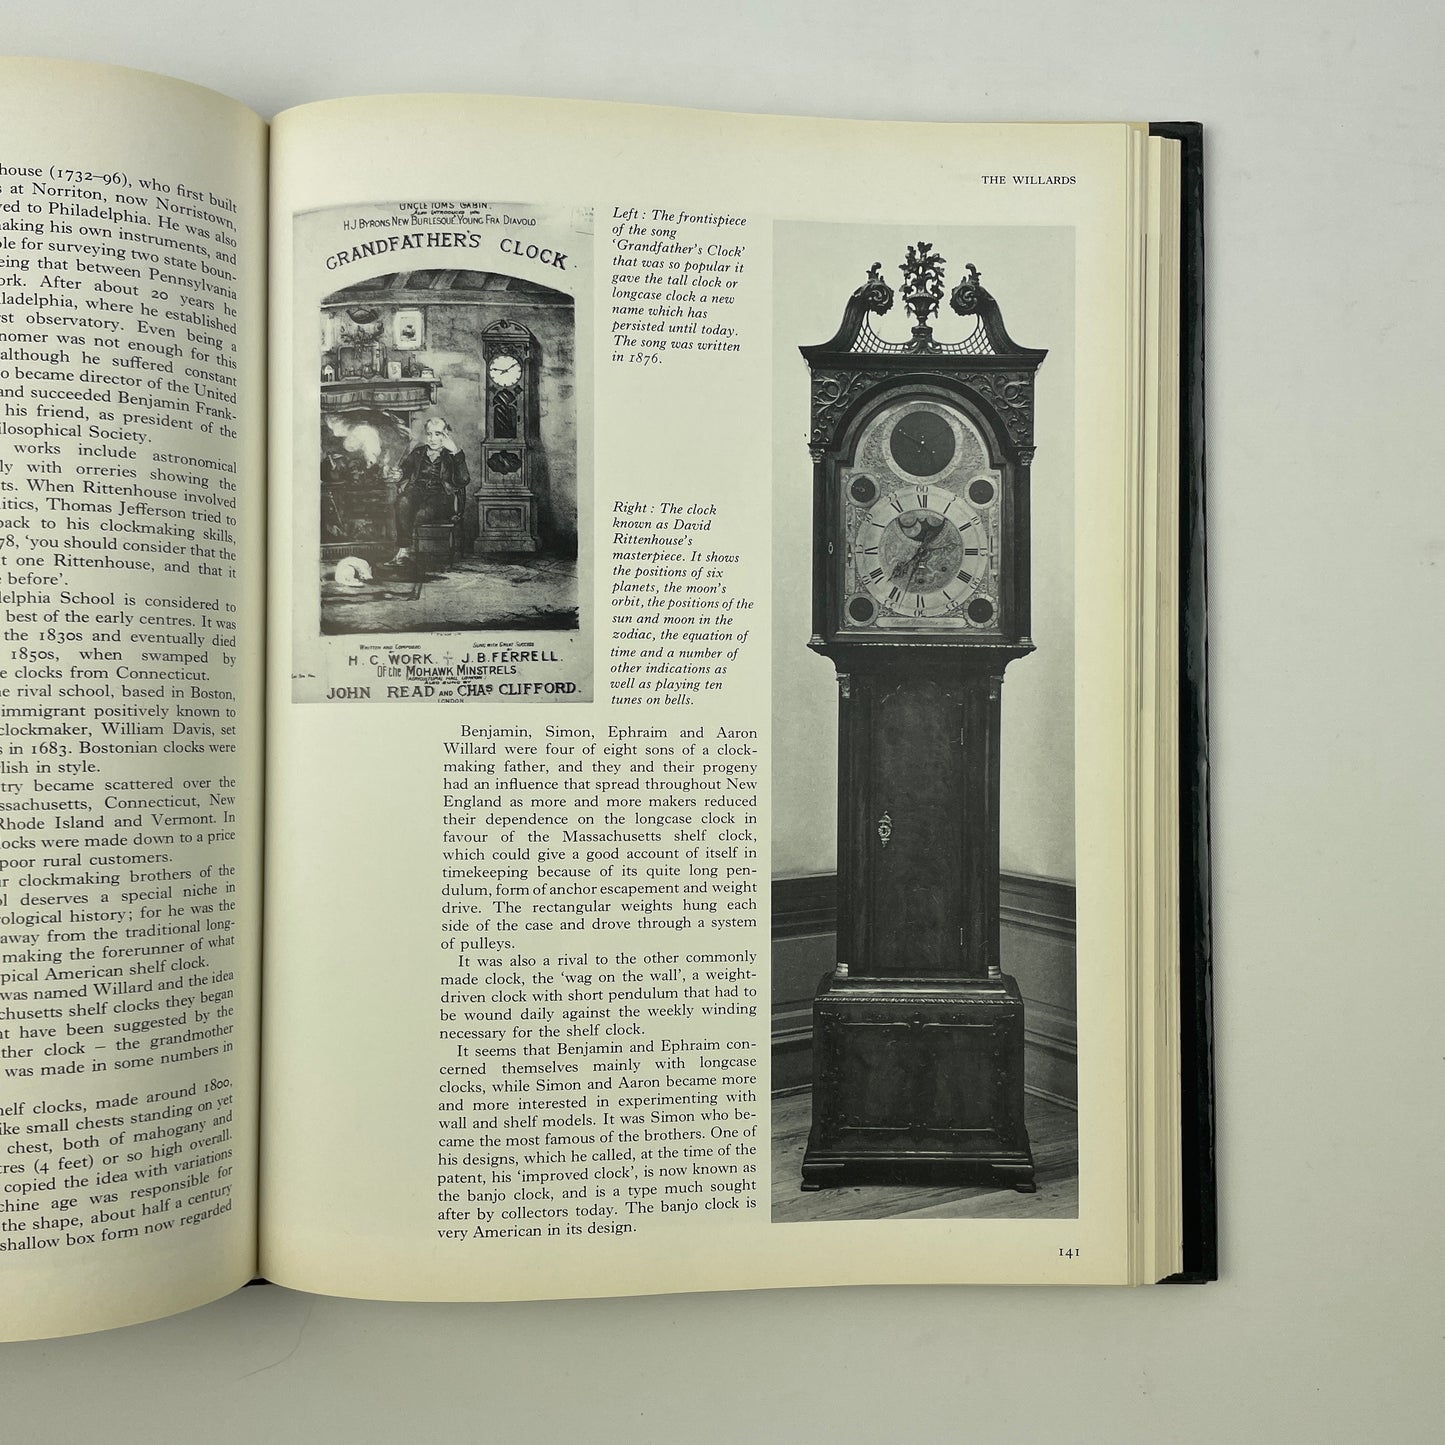 Oct Lot 51- The History of Clocks and Watches | Book